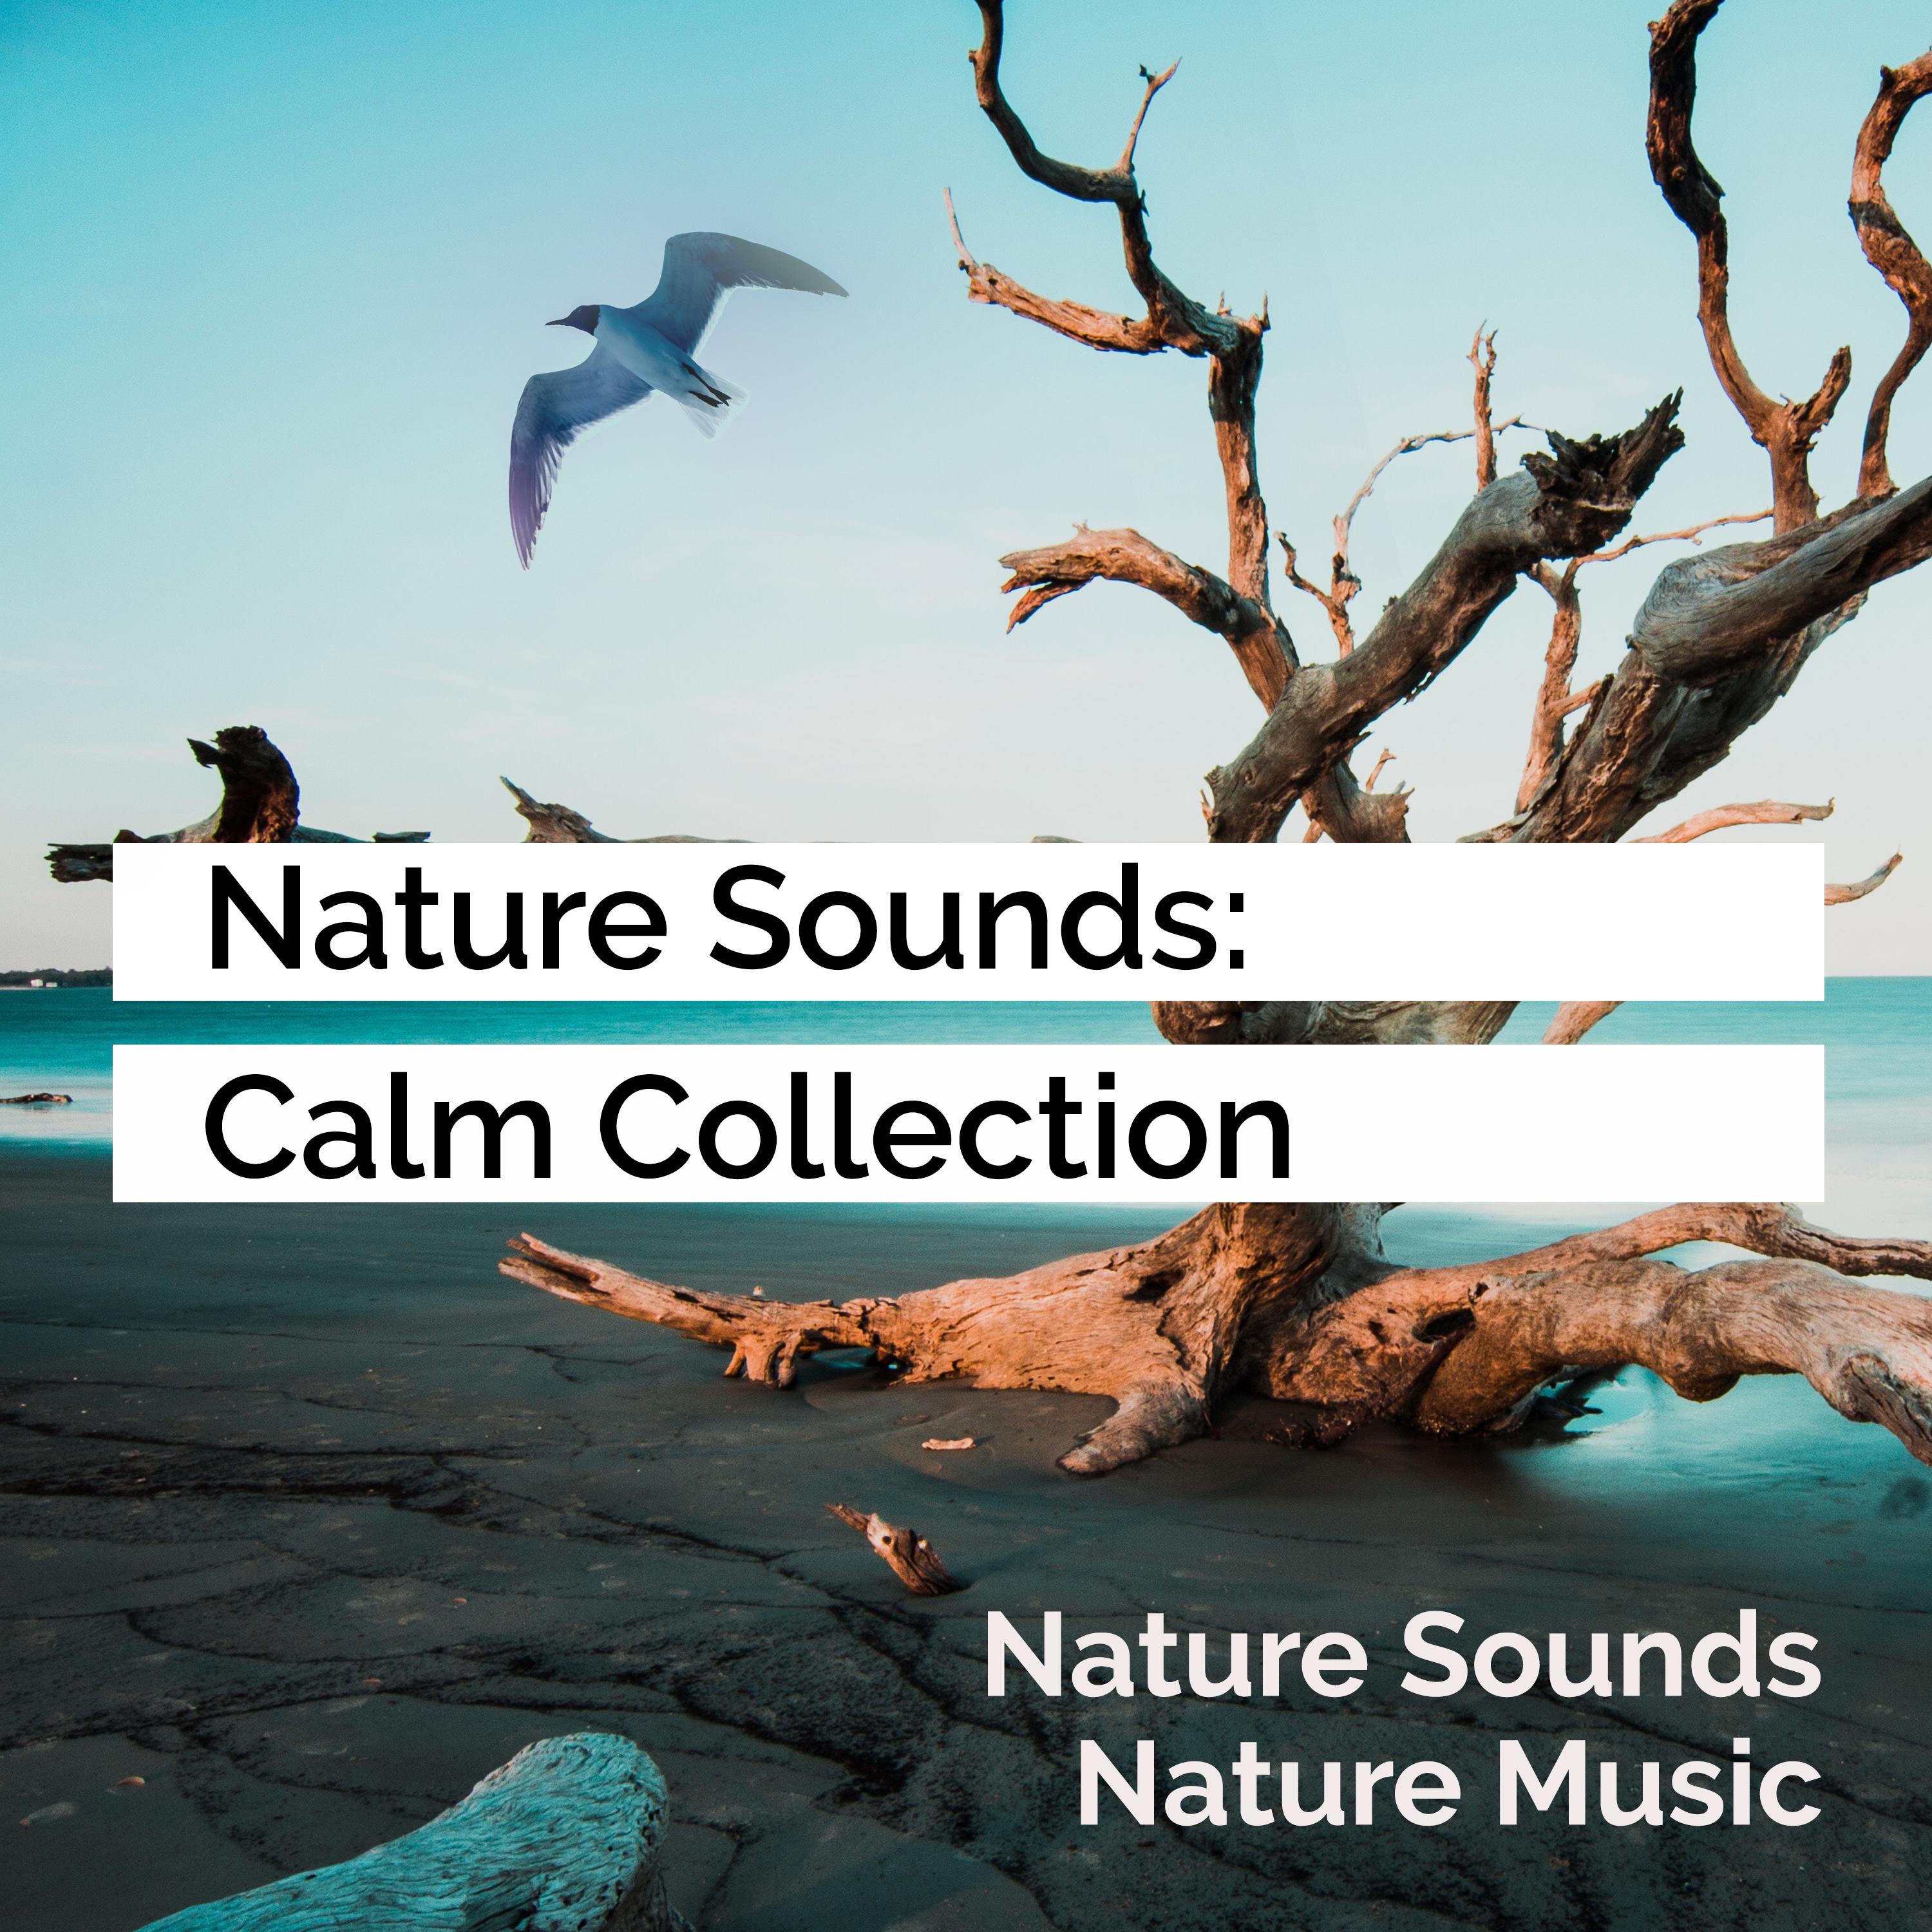 Nature Sounds: Calm Collection